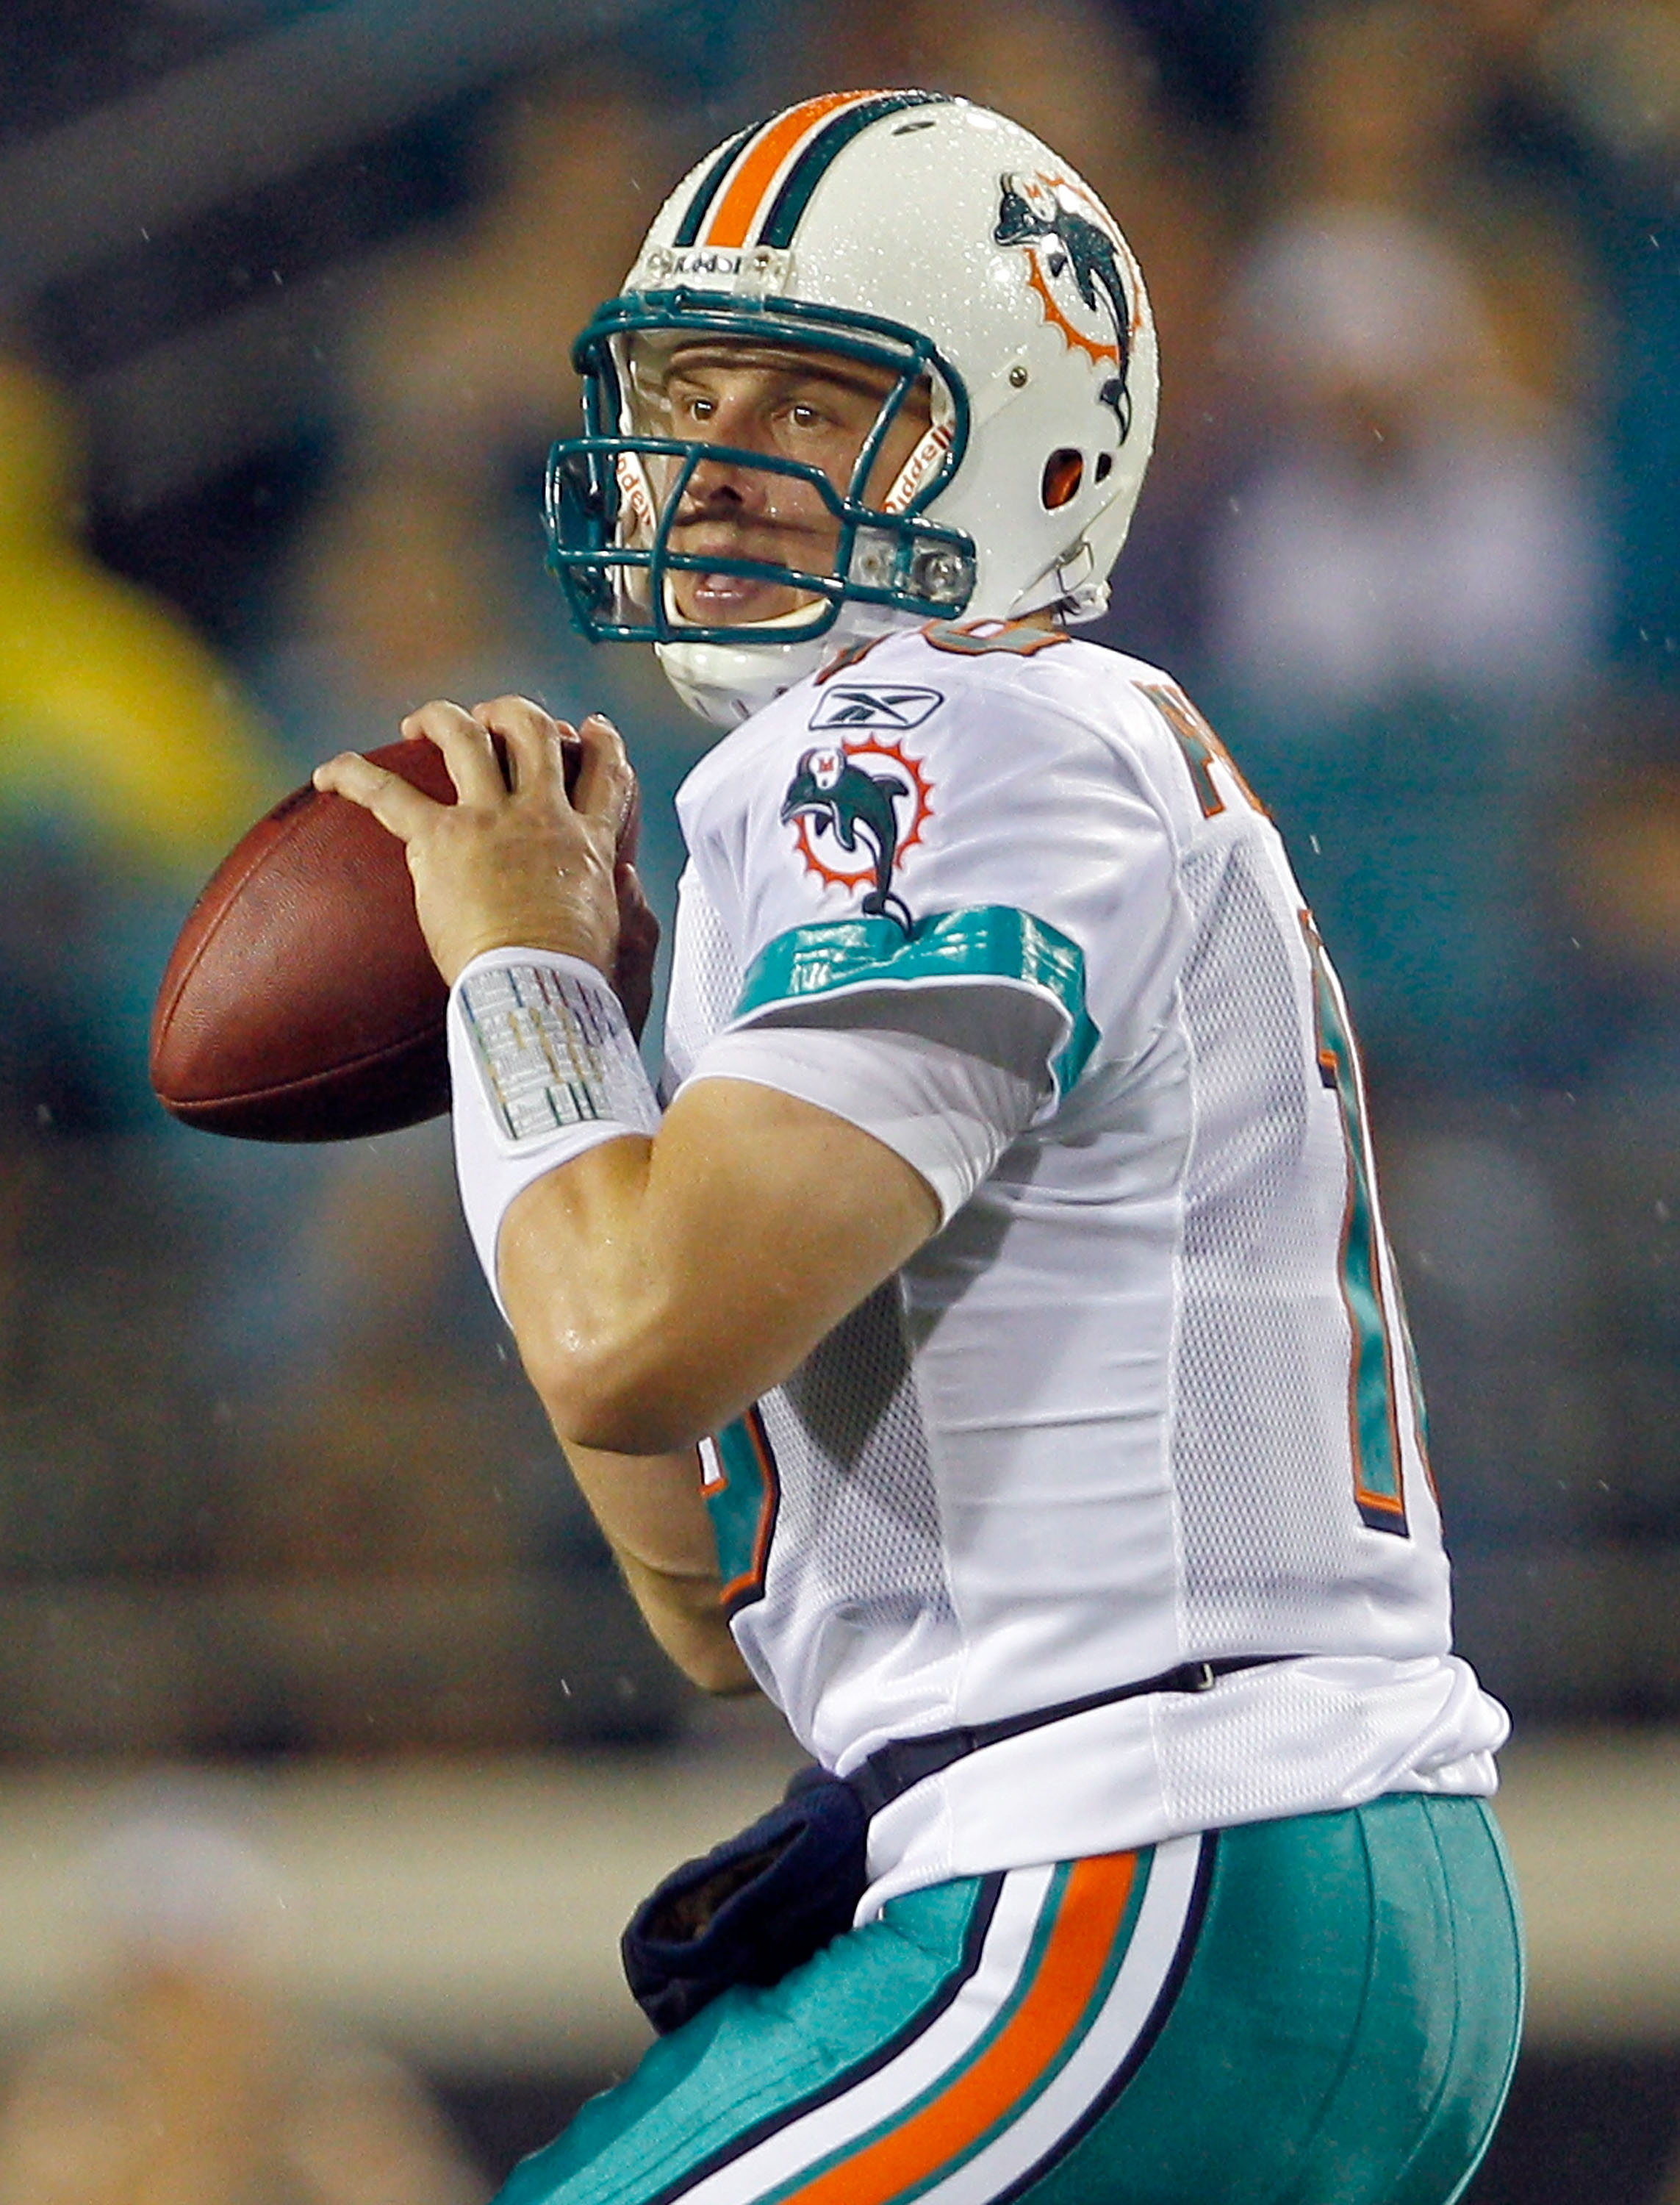 Chad Pennington Named Miami Dolphins QB, Chad Henne Benched: Five Reasons Why | News, Scores